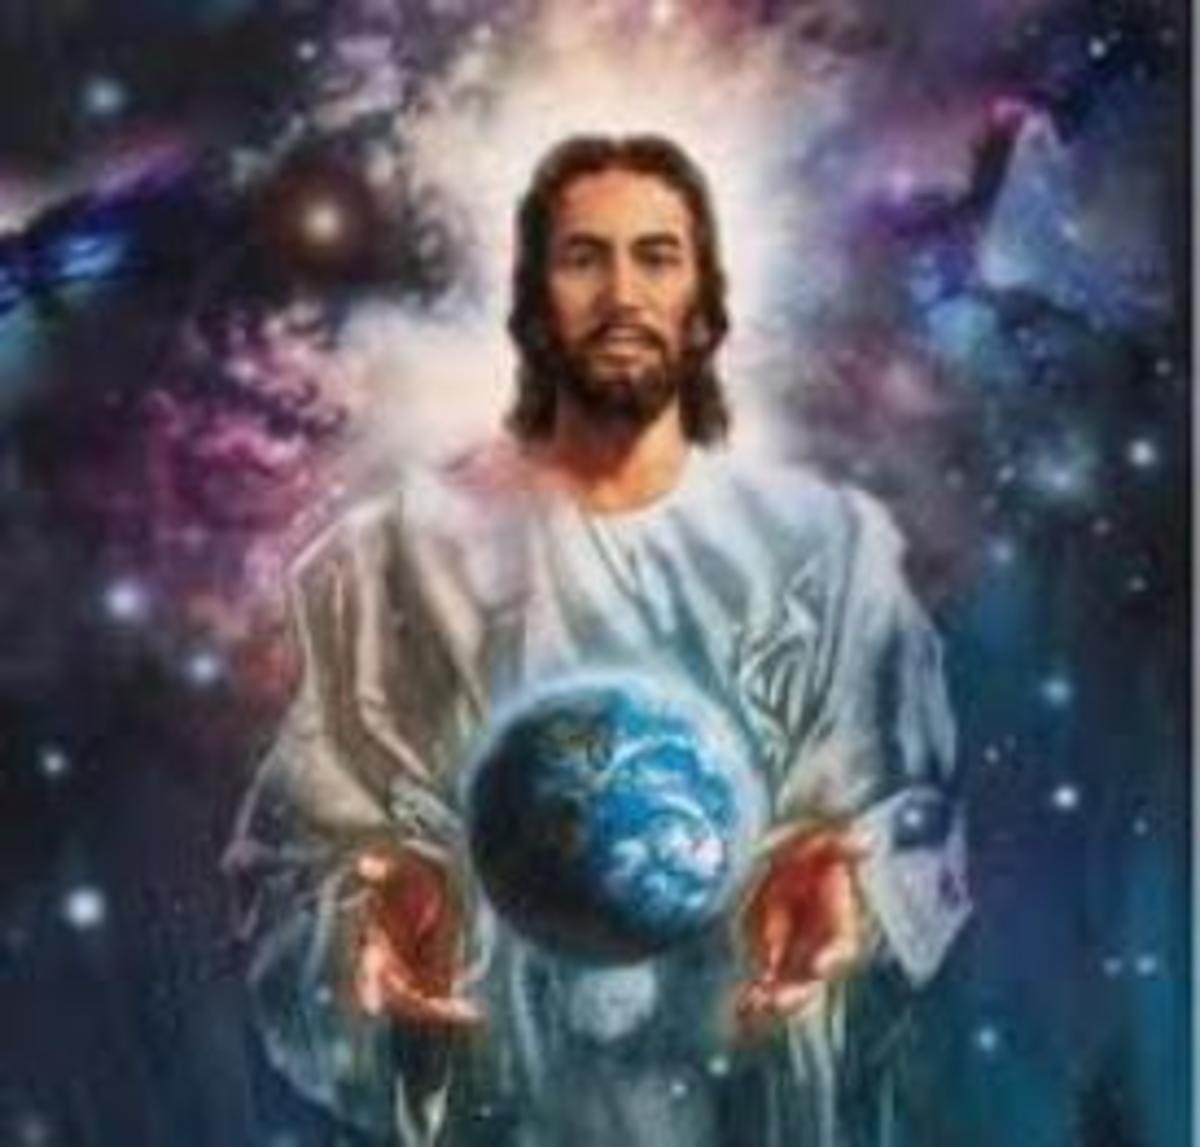 Our Lord Jesus Christ is said to be the son of God and therefore God. But we have to say that not everybody accept that he is God, but definitely he must be the greatest man that ever lived on earth and the closest human that could represent God.